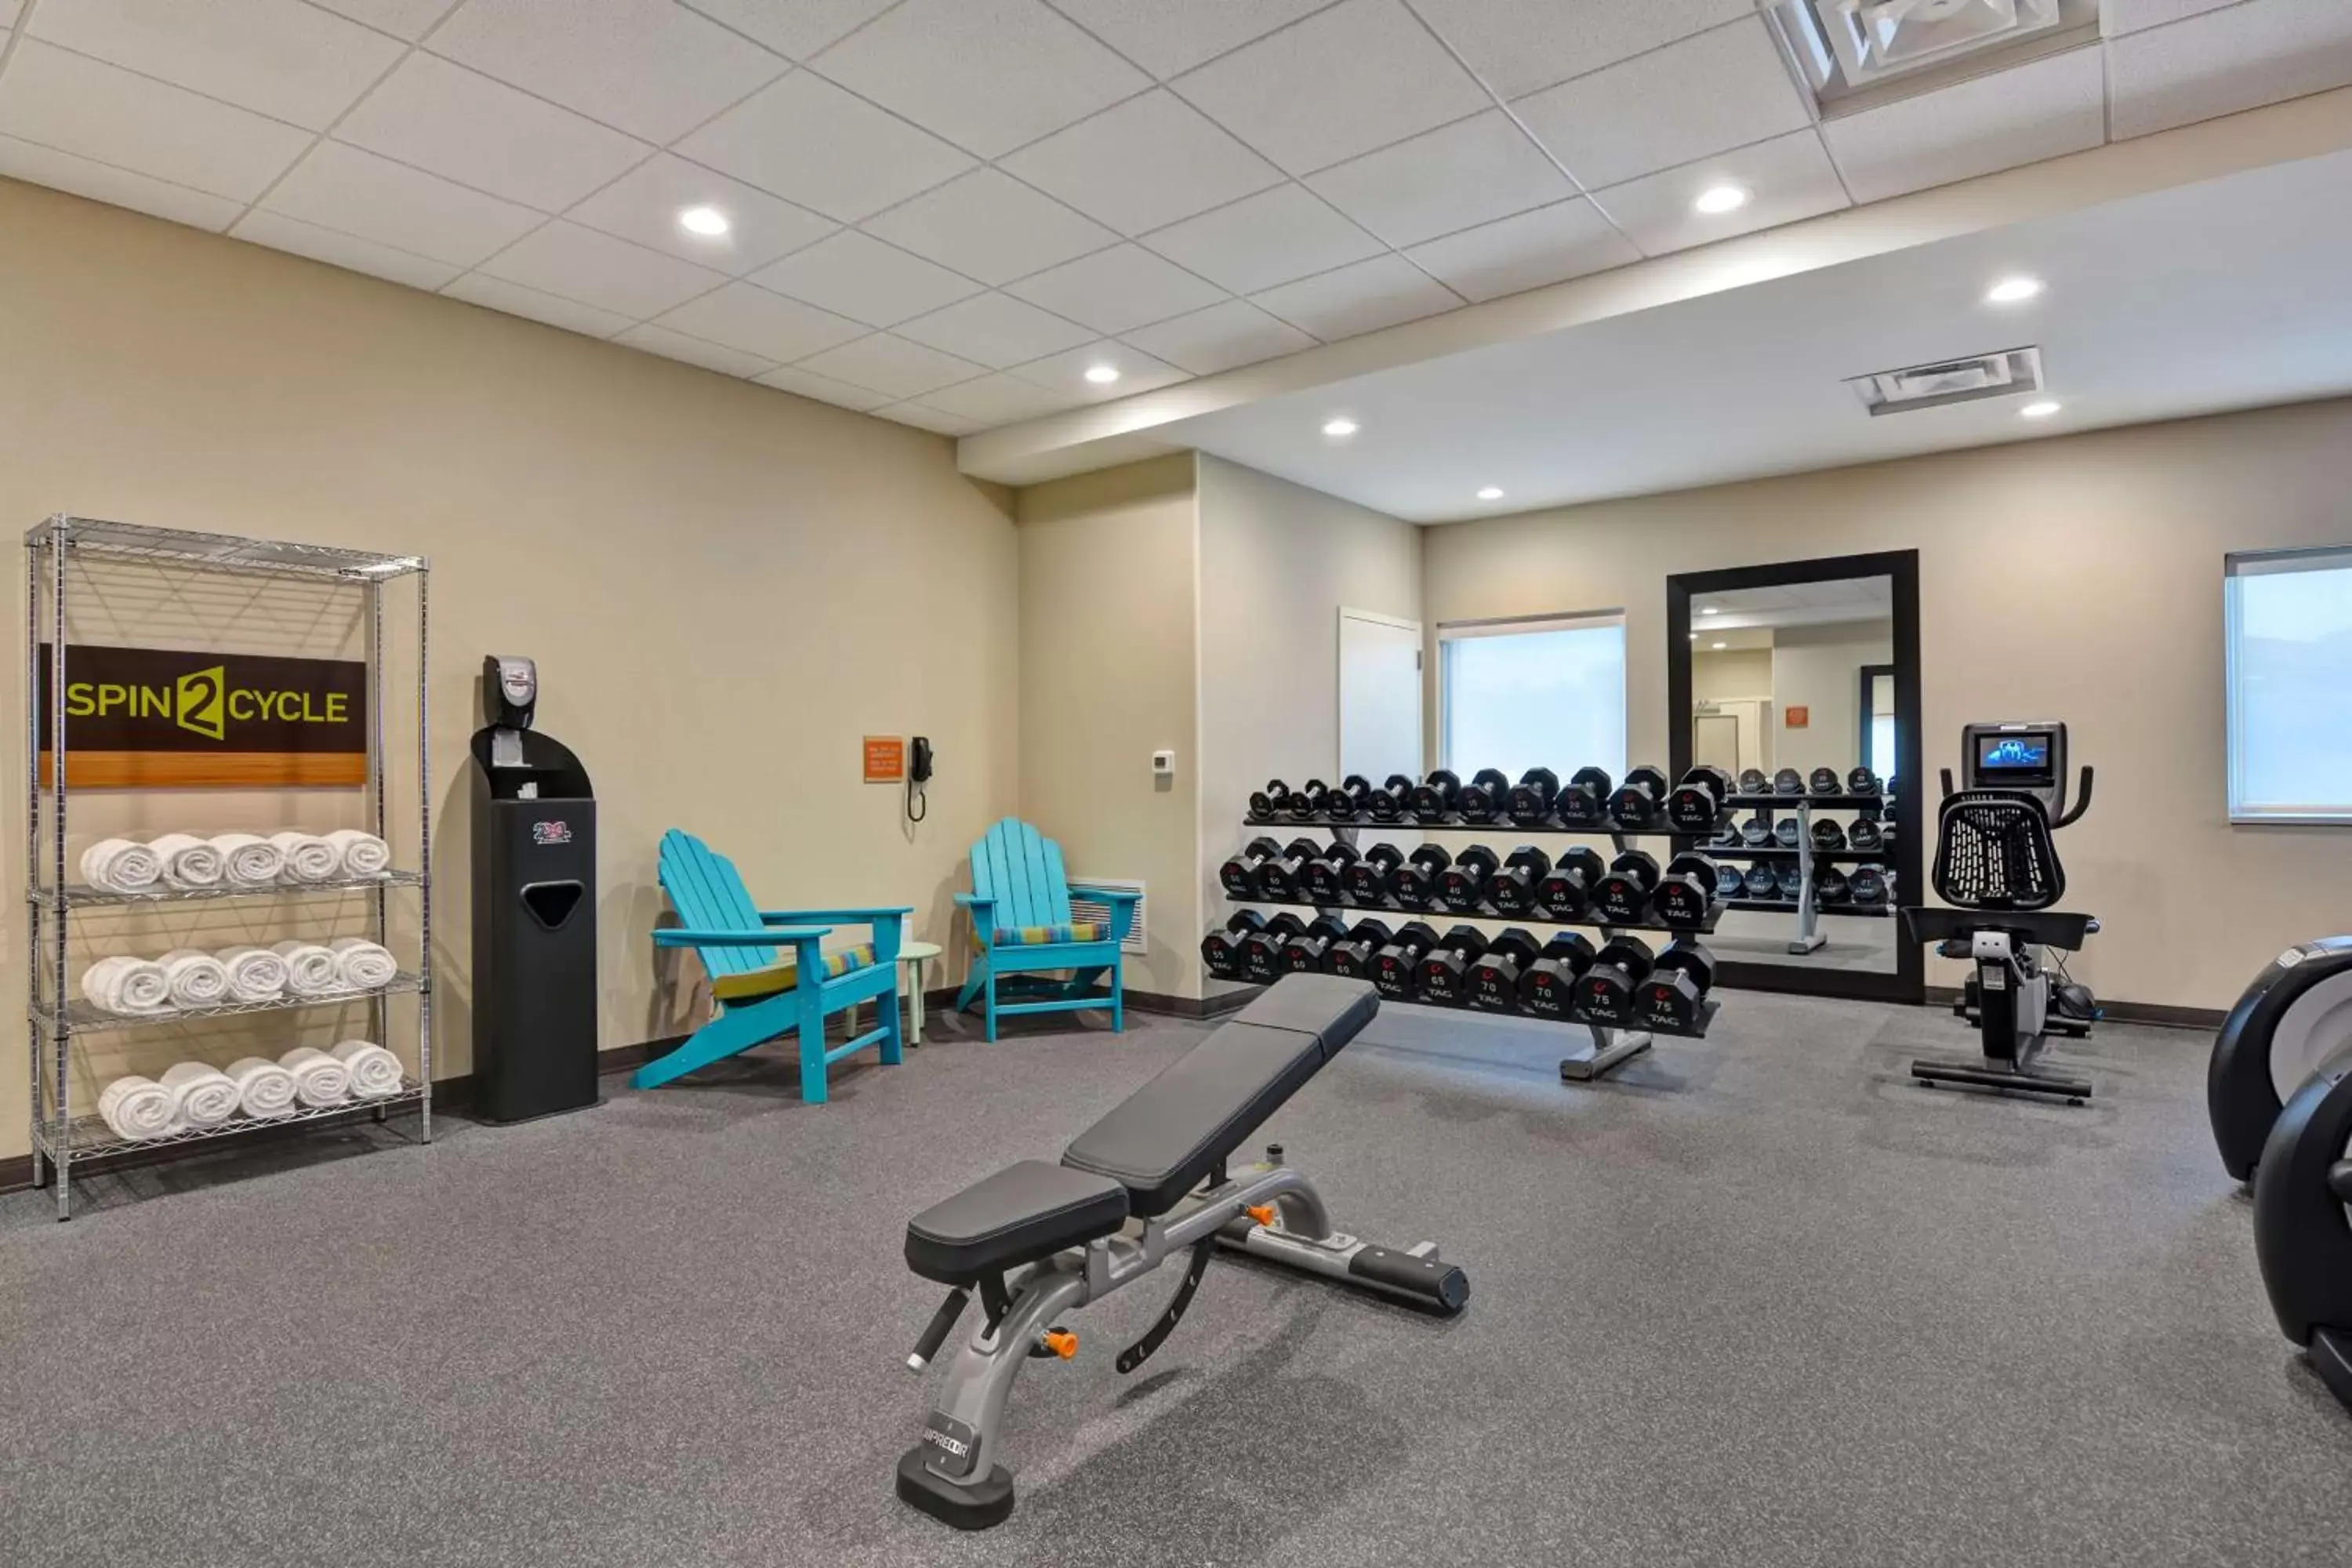 Fitness centre/facilities, Fitness Center/Facilities in Home2 Suites by Hilton, Sarasota I-75 Bee Ridge, Fl